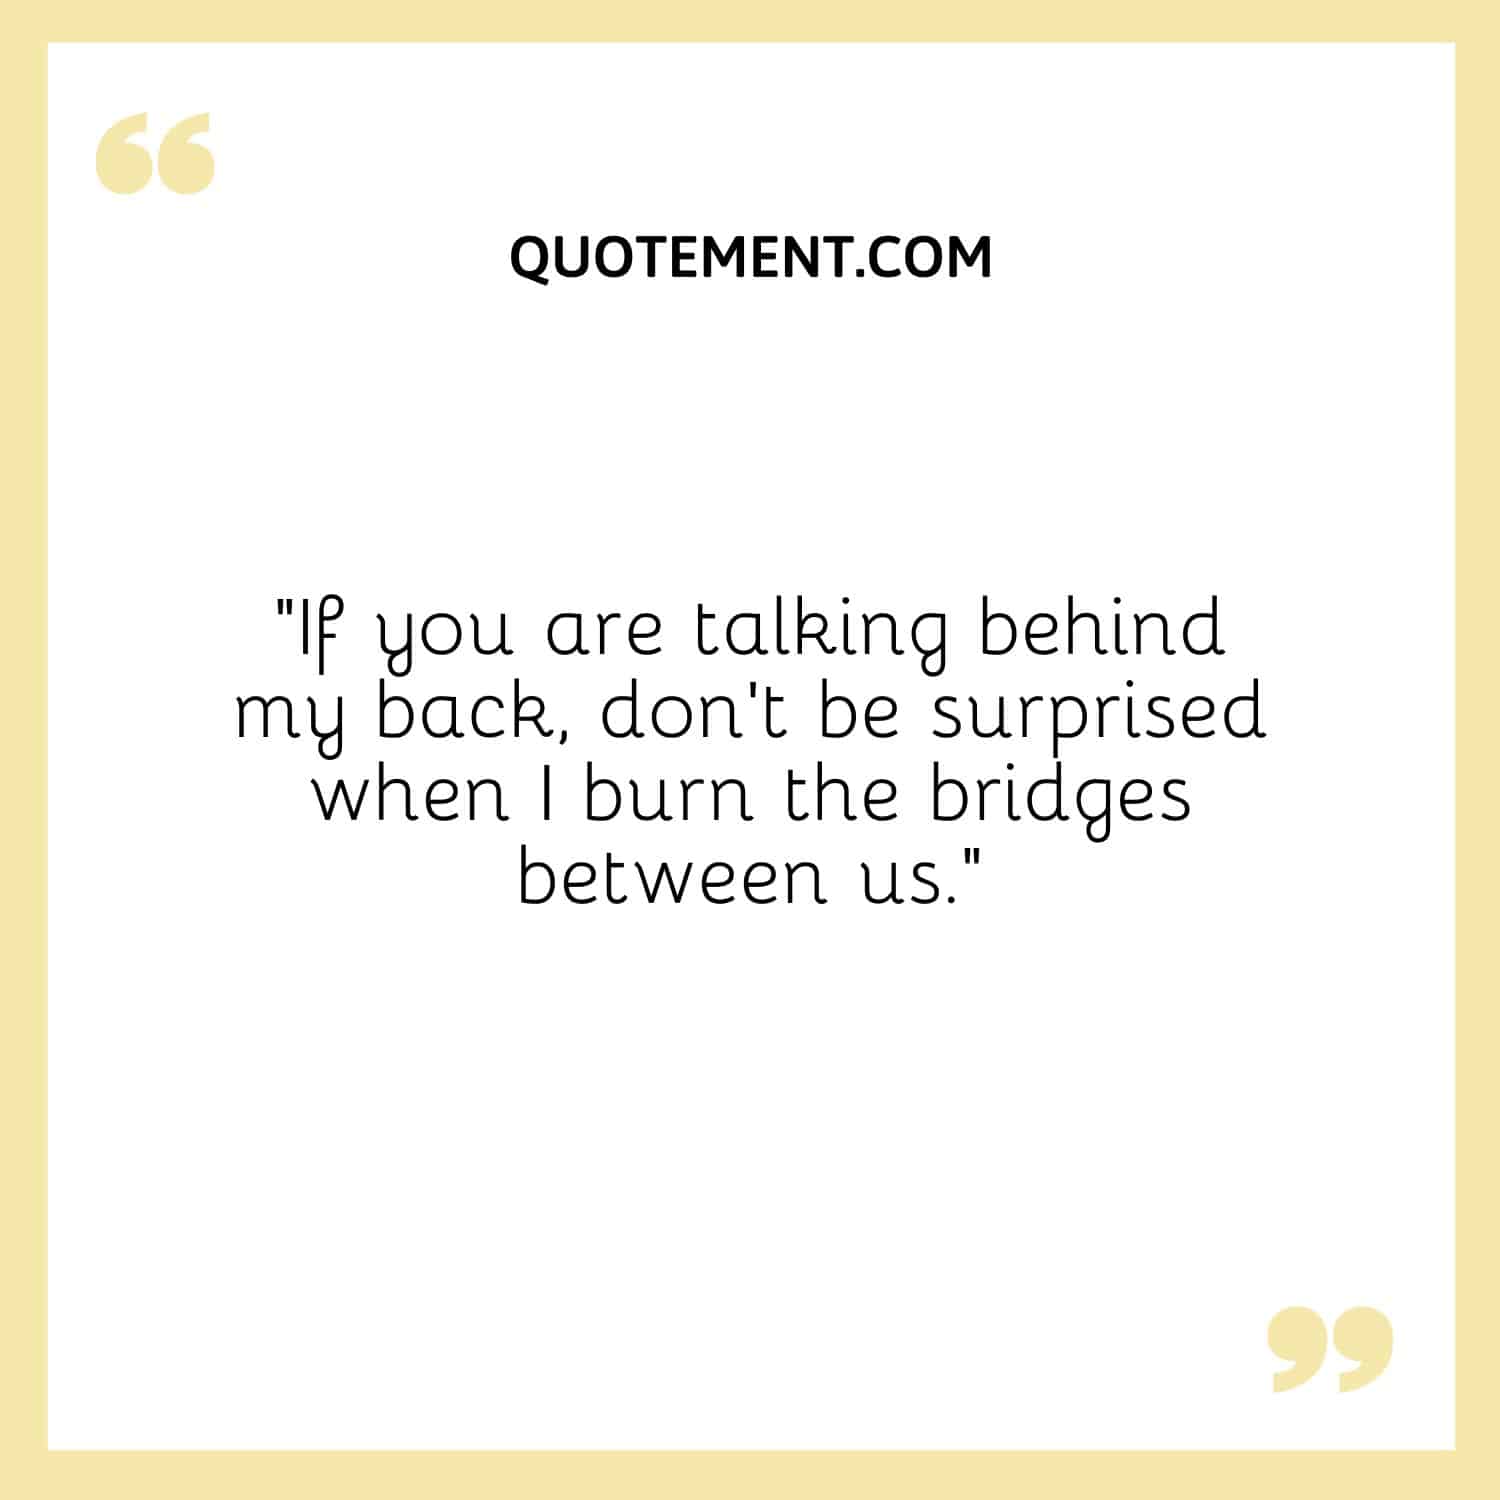 The Best List Of 130 People Talk Behind Your Back Quotes